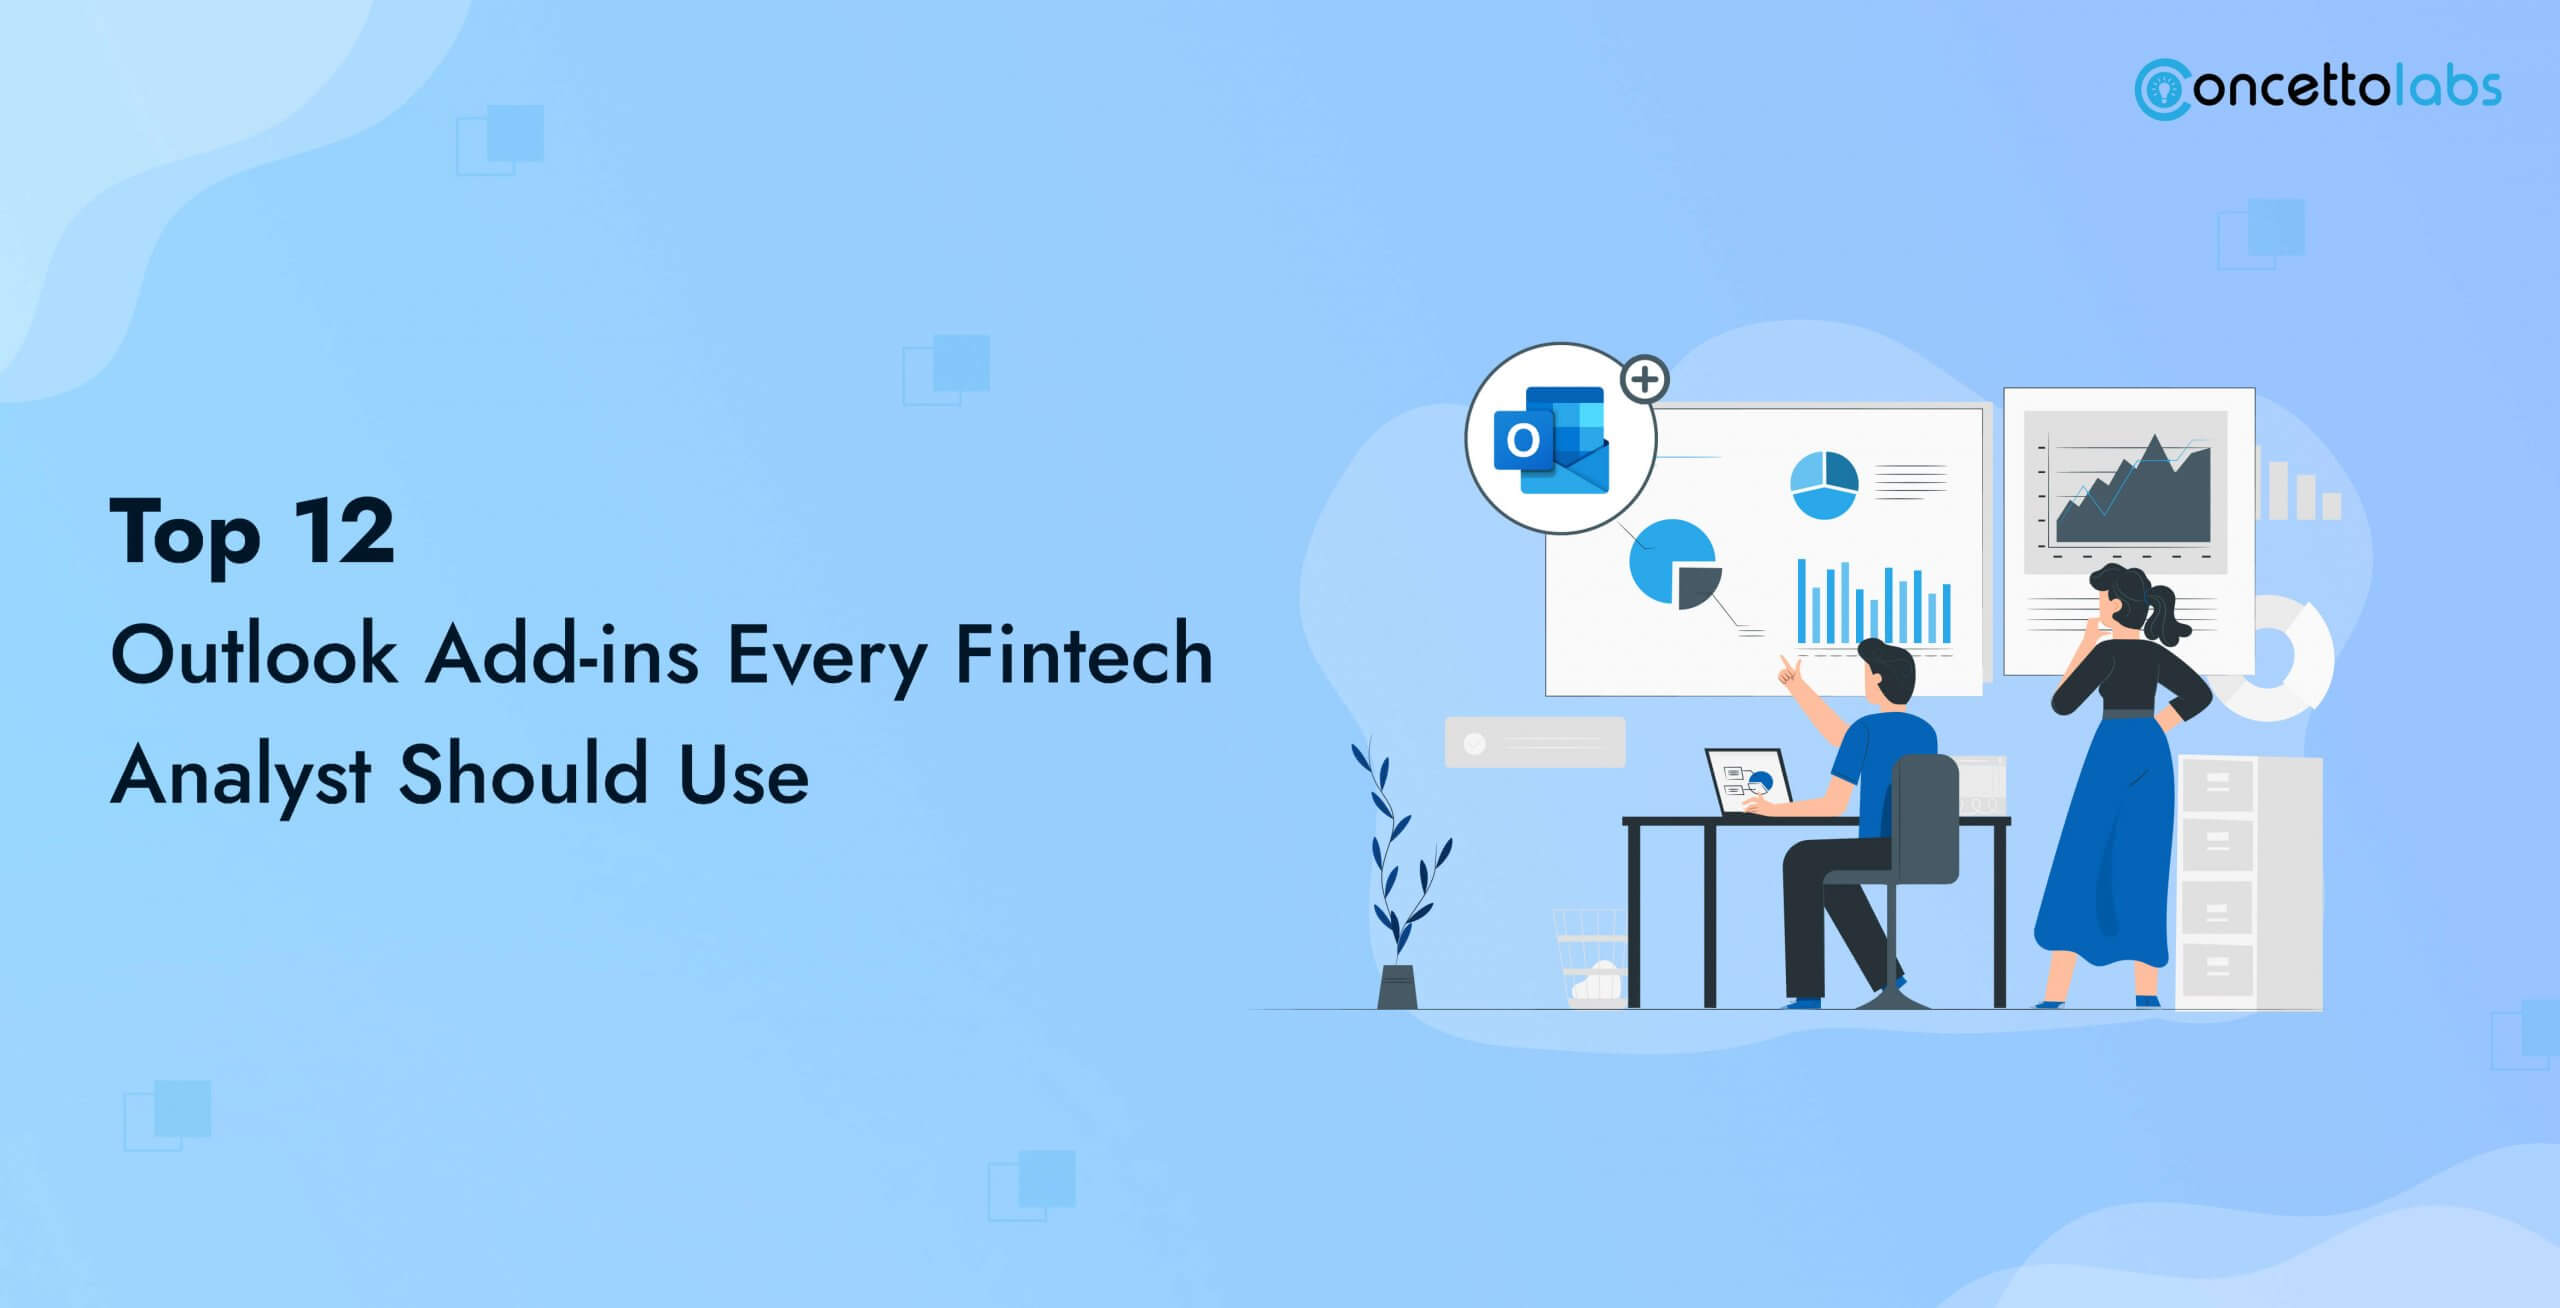 Top 12 Outlook Add-ins Every Fintech Analyst Should Use